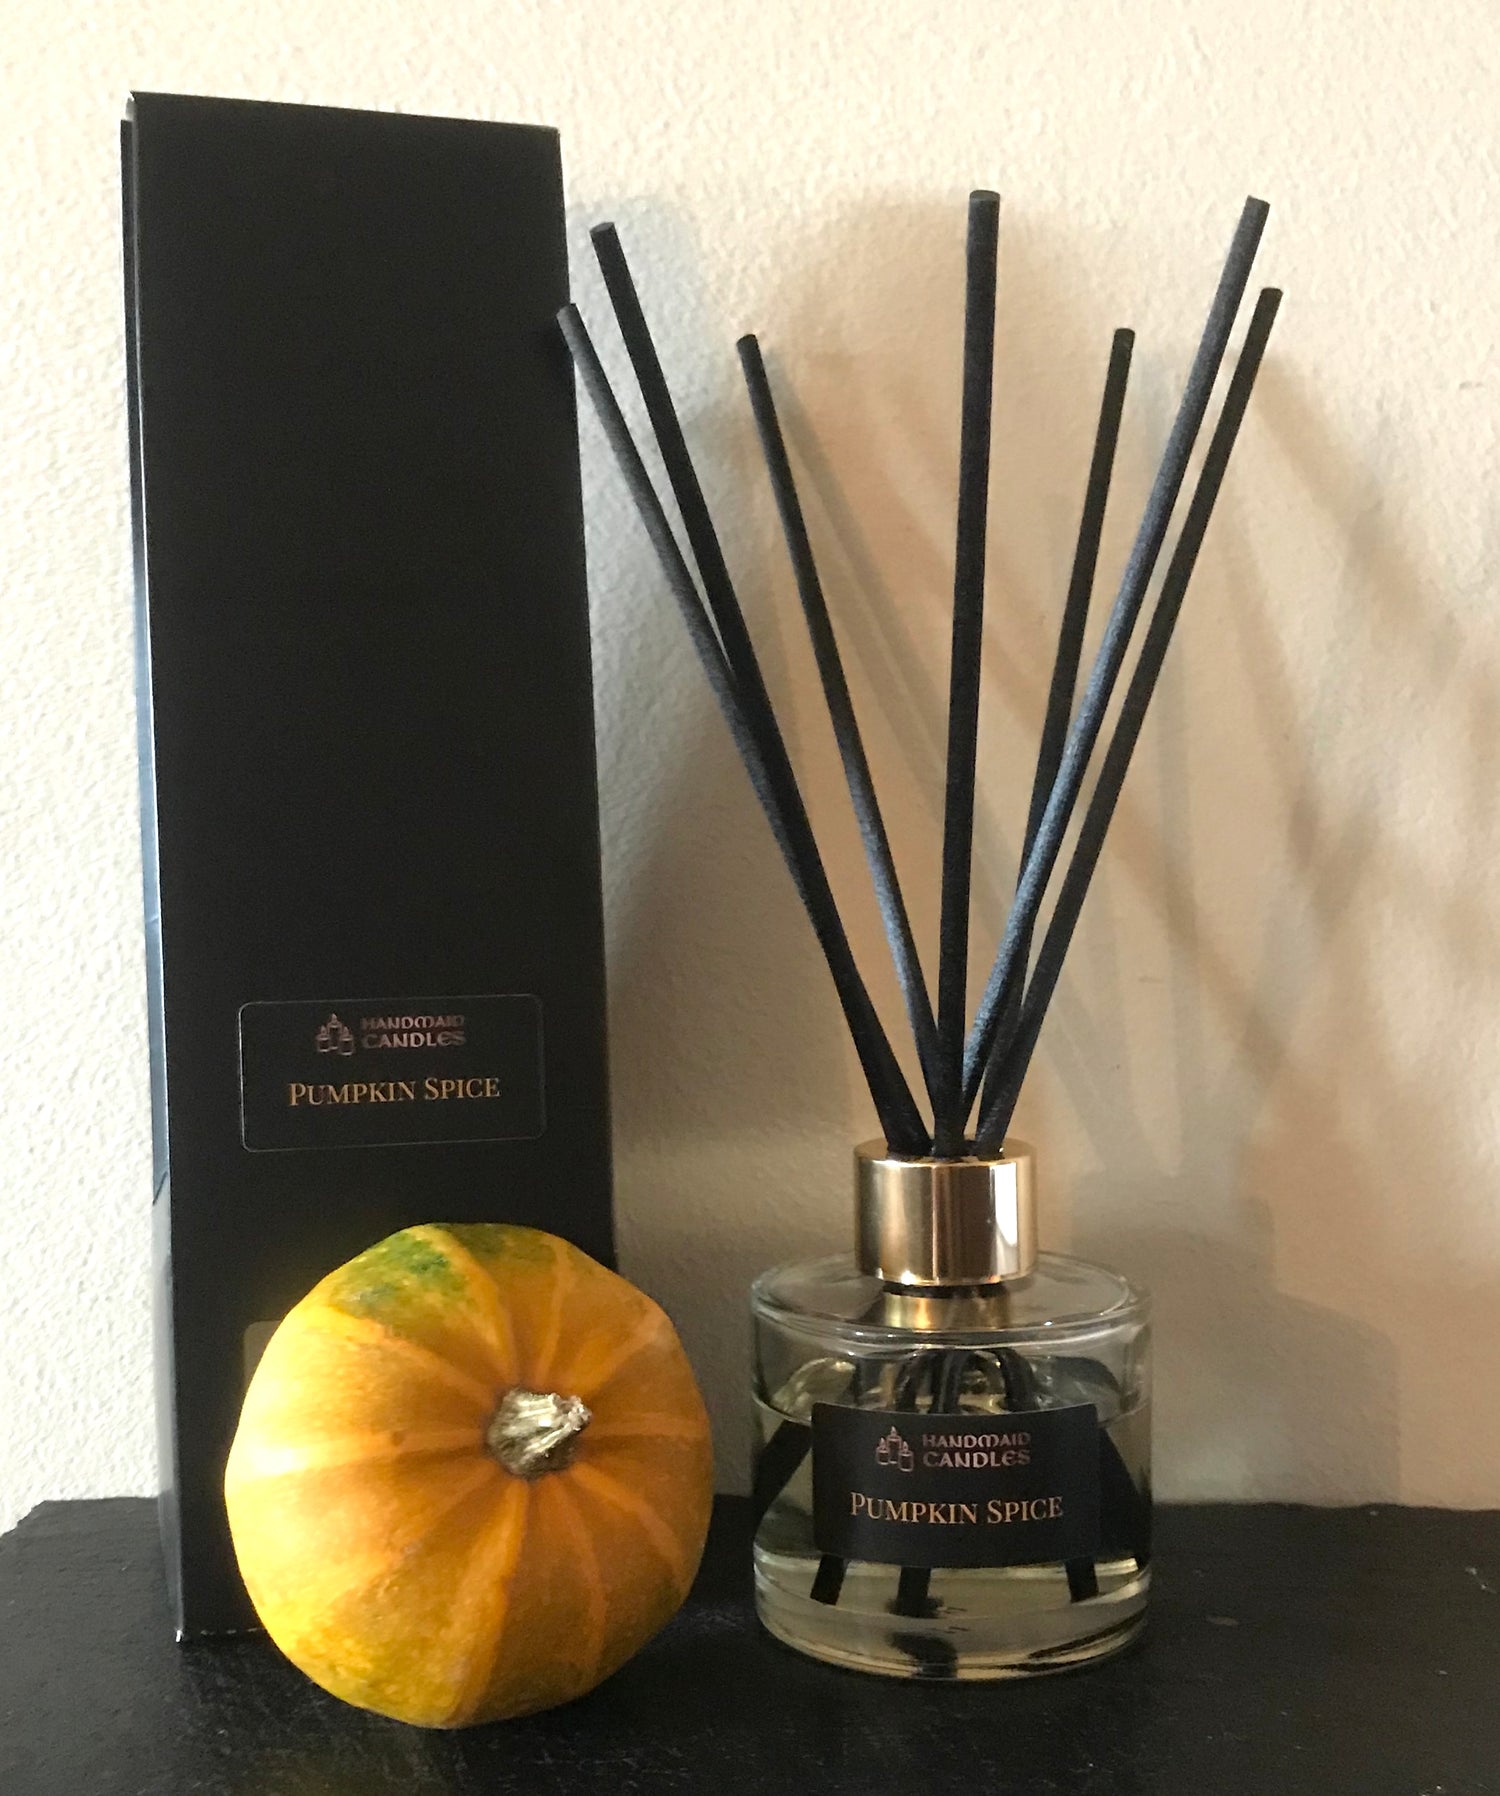 Halloween Reed Diffusers